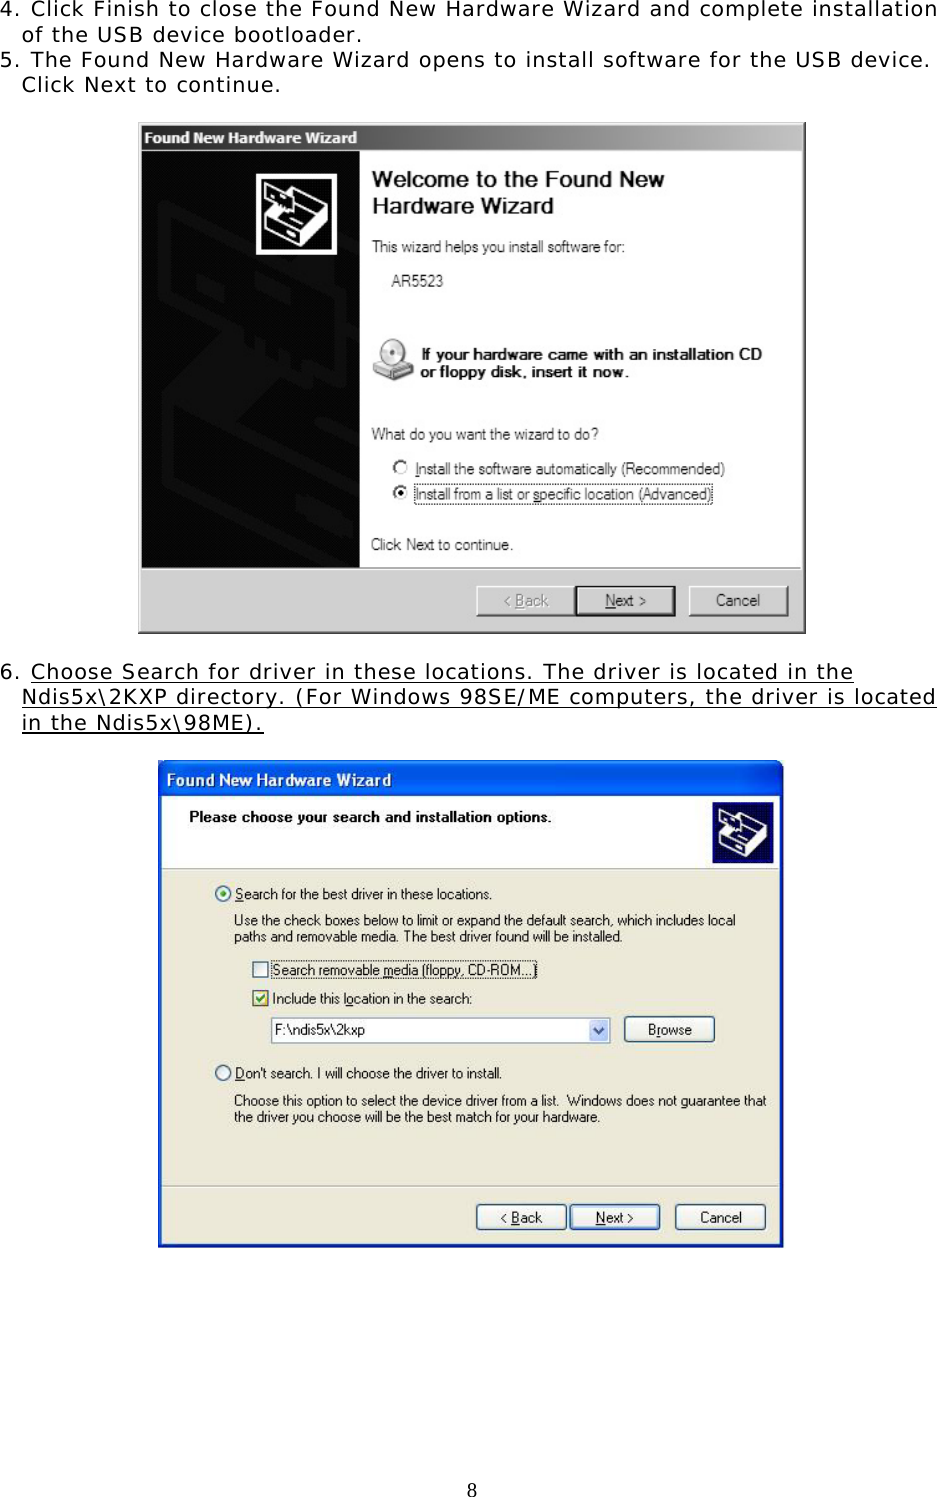  8  4. Click Finish to close the Found New Hardware Wizard and complete installation of the USB device bootloader.  5. The Found New Hardware Wizard opens to install software for the USB device. Click Next to continue.    6. Choose Search for driver in these locations. The driver is located in the Ndis5x\2KXP directory. (For Windows 98SE/ME computers, the driver is located in the Ndis5x\98ME).           